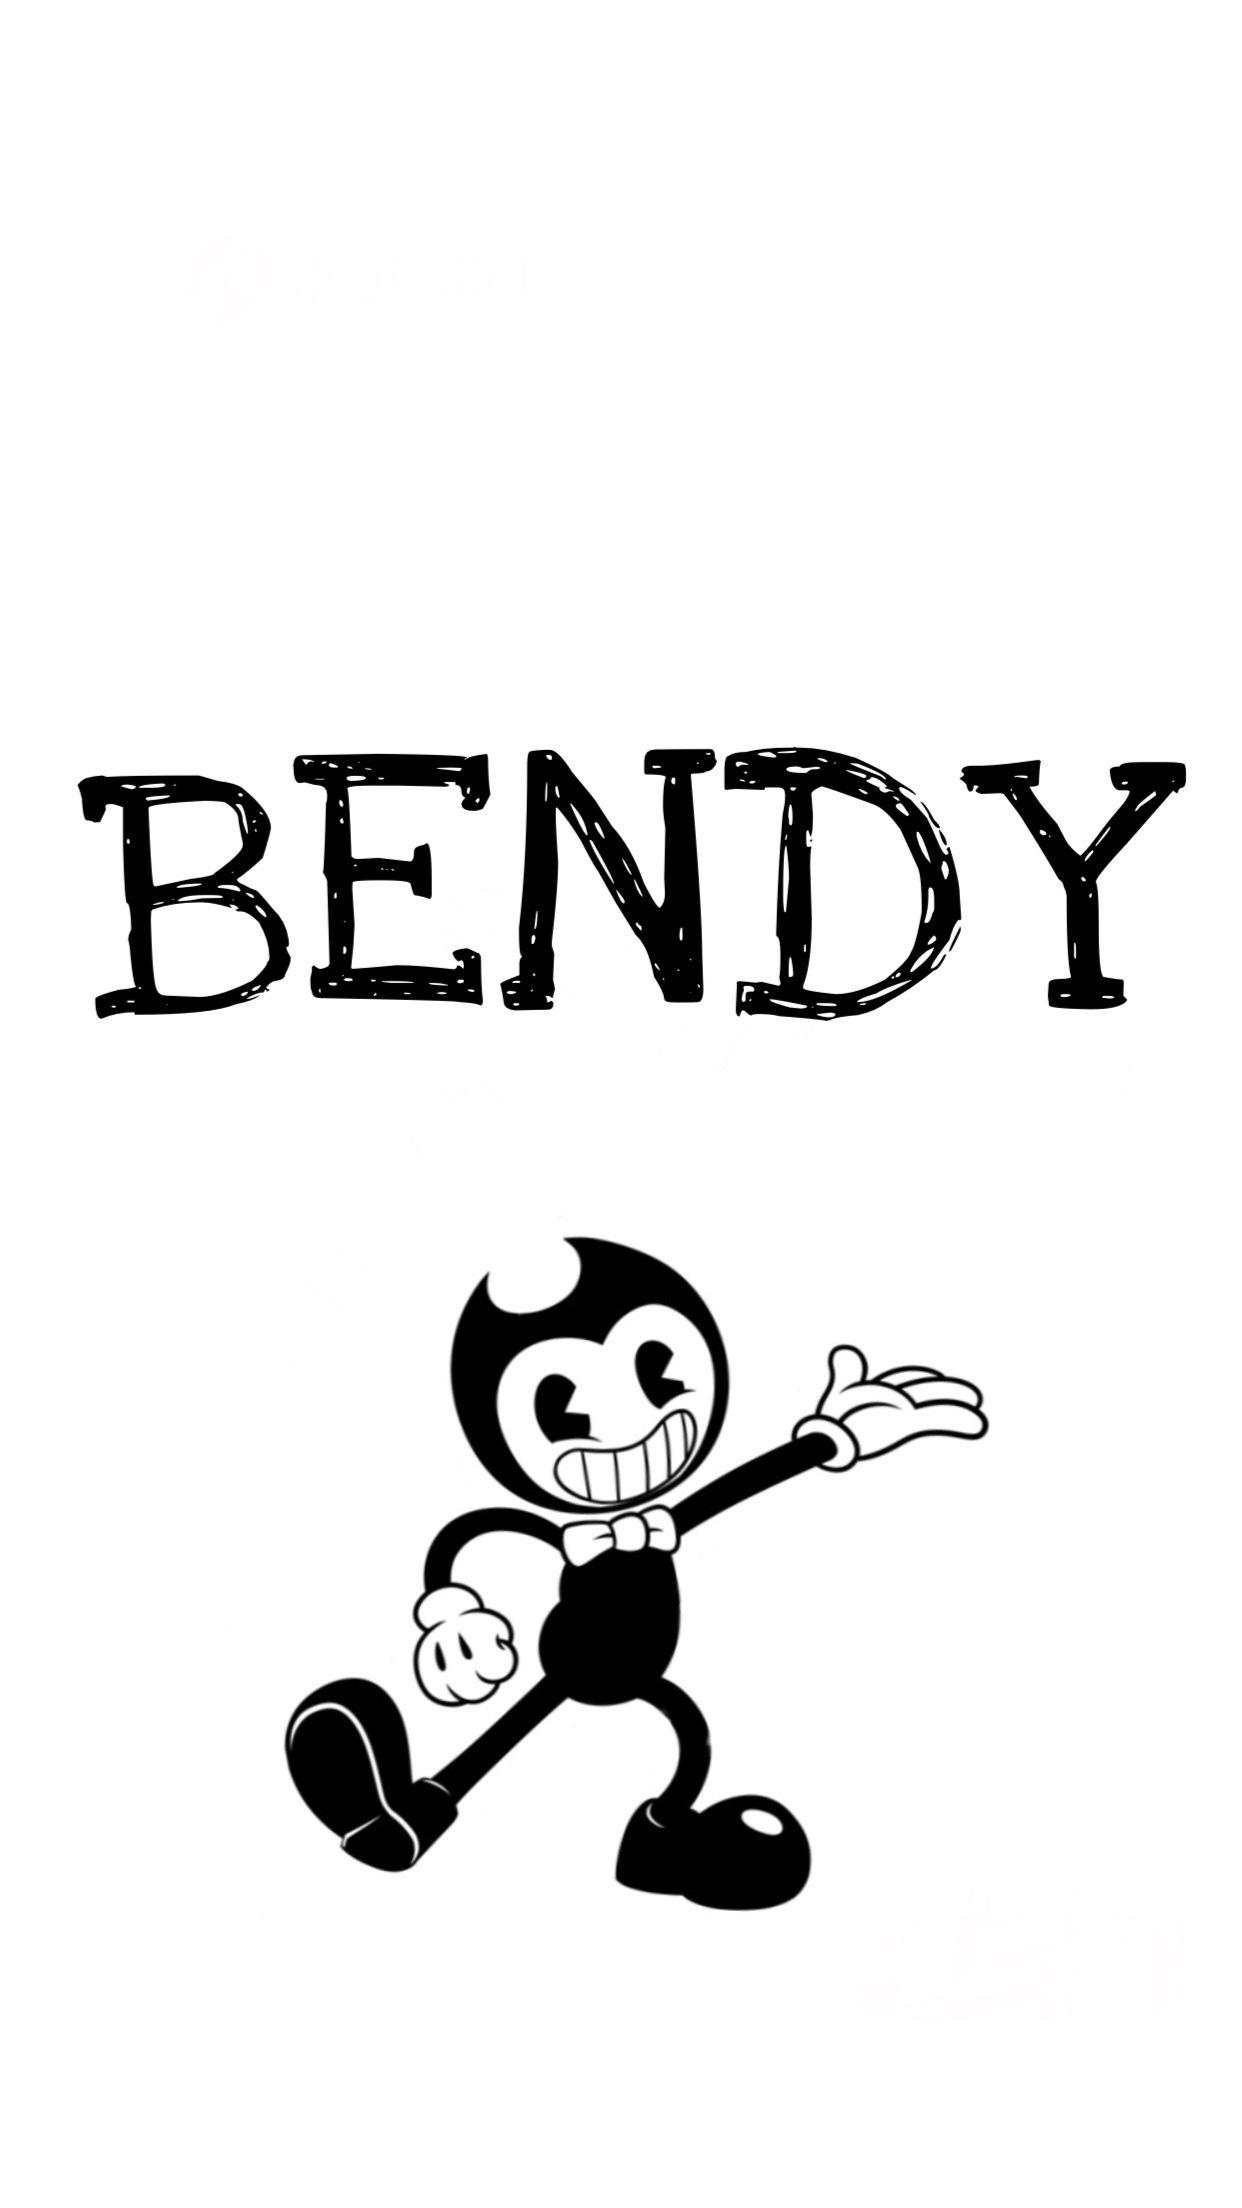 Bendy and the ink machine wallpaper ????????????????????????. Bendy. Bendy